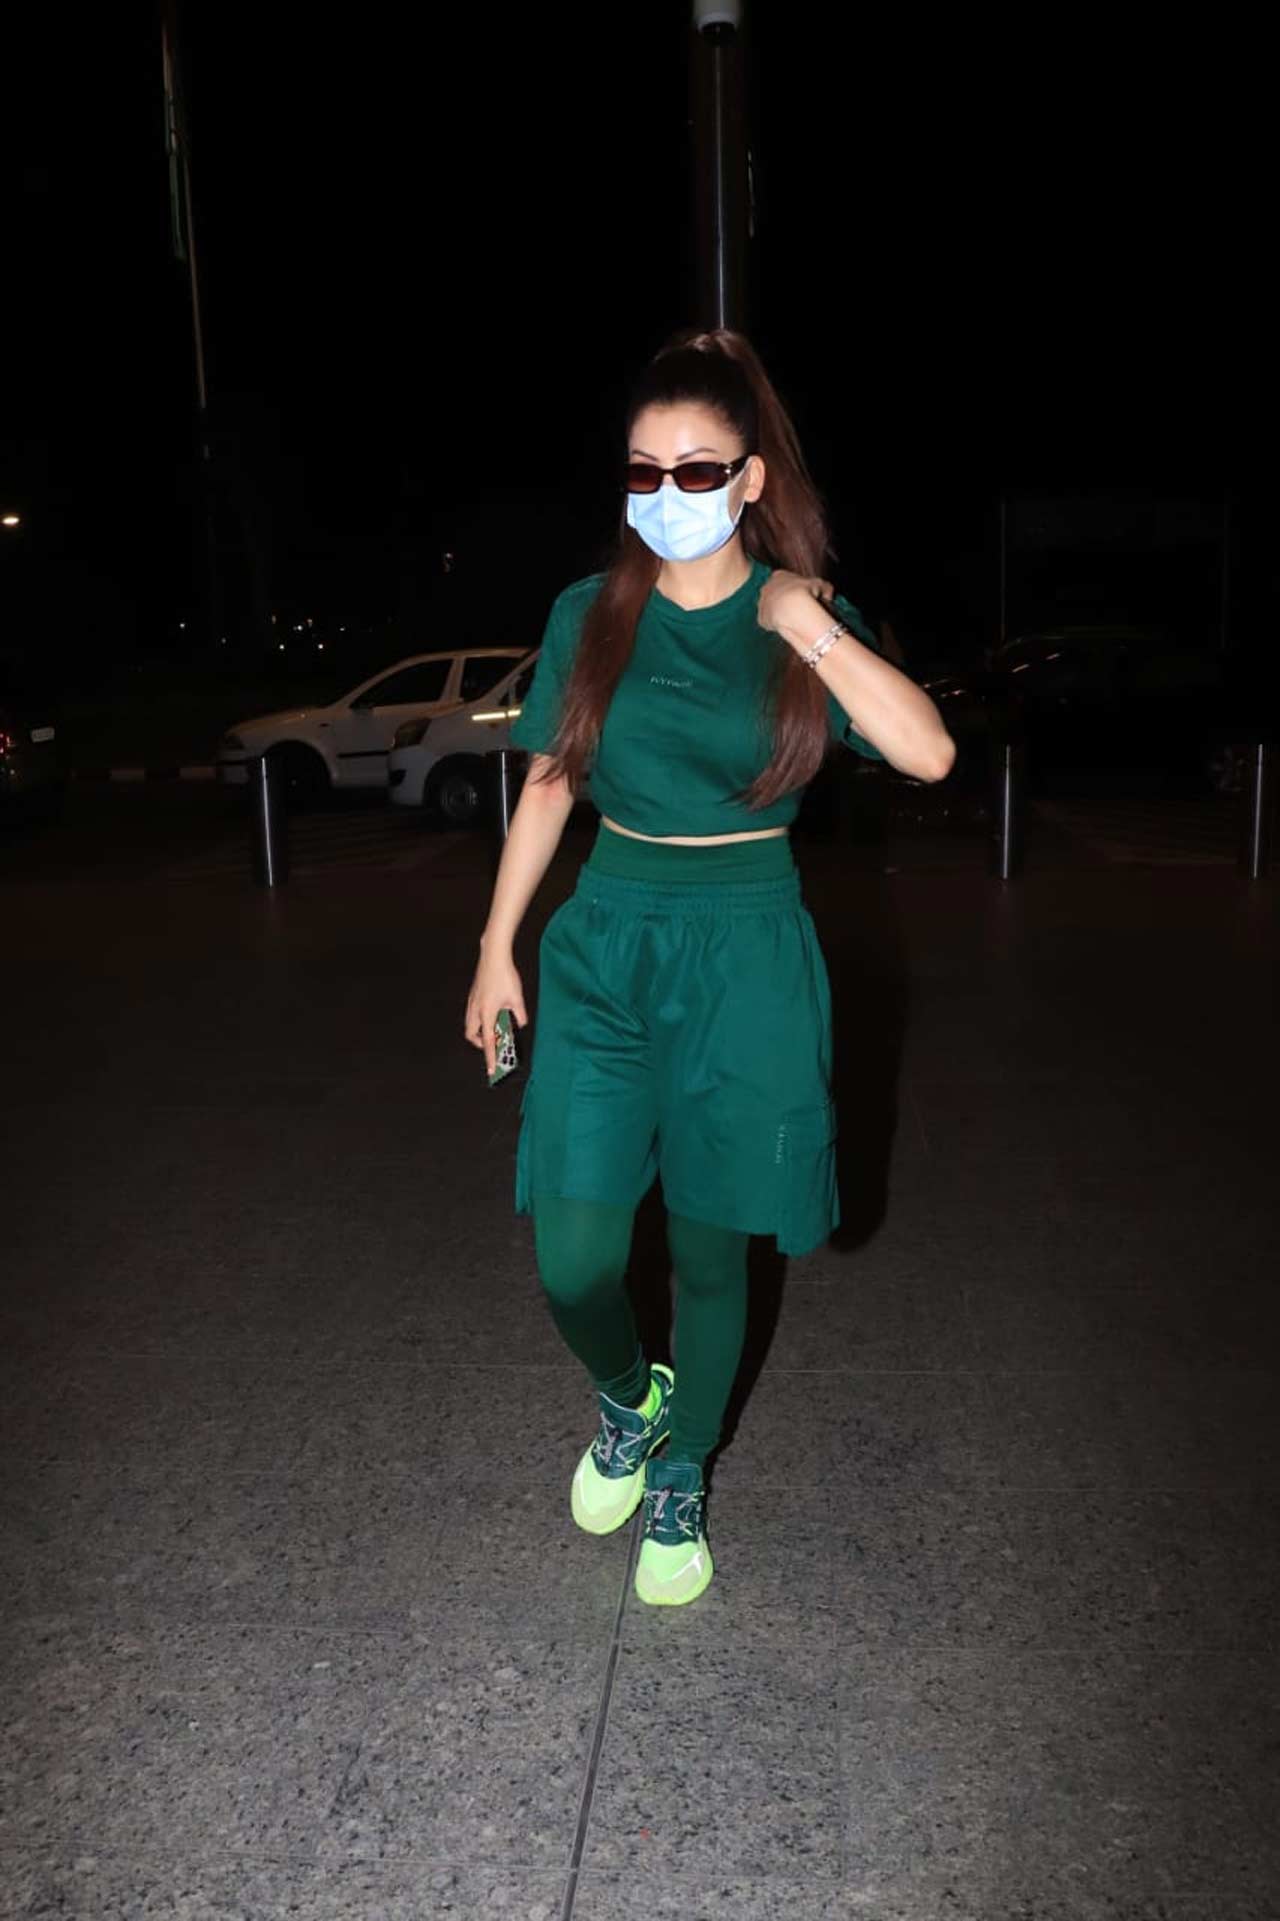 Urvashi Rautela was seen wearing a quirky green coloured outfit when papped at Mumbai airport. On the work front, Urvashi Rautela has lots of exciting projects. Soon she will be seen alongside Randeep Hooda in the web series Inspector Avinash. Apart from that, she is also a part of, Black Rose a bilingual thriller that has Urvashi Rautela as lead is going to be released soon and the actress will also be appearing in the Hindi remake of Thirutu Payale 2. 